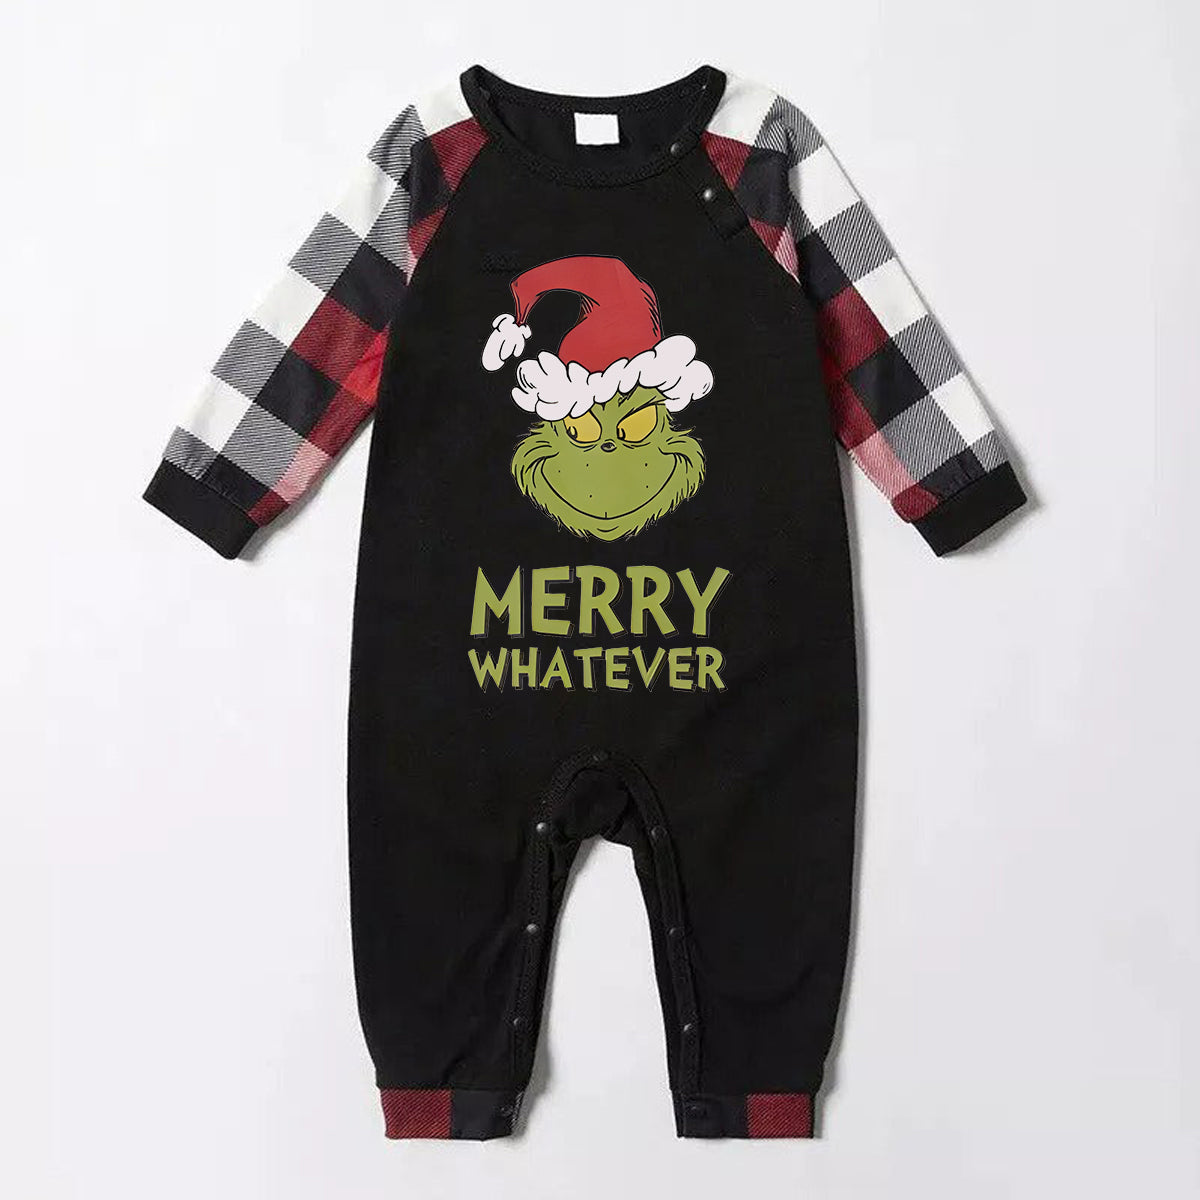 Christmas Cartoon and 'Merry Whatever' Letter Print Contrast Tops and Red & Black & White Plaid Pants Family Matching Pajamas Set With Dog Bandana